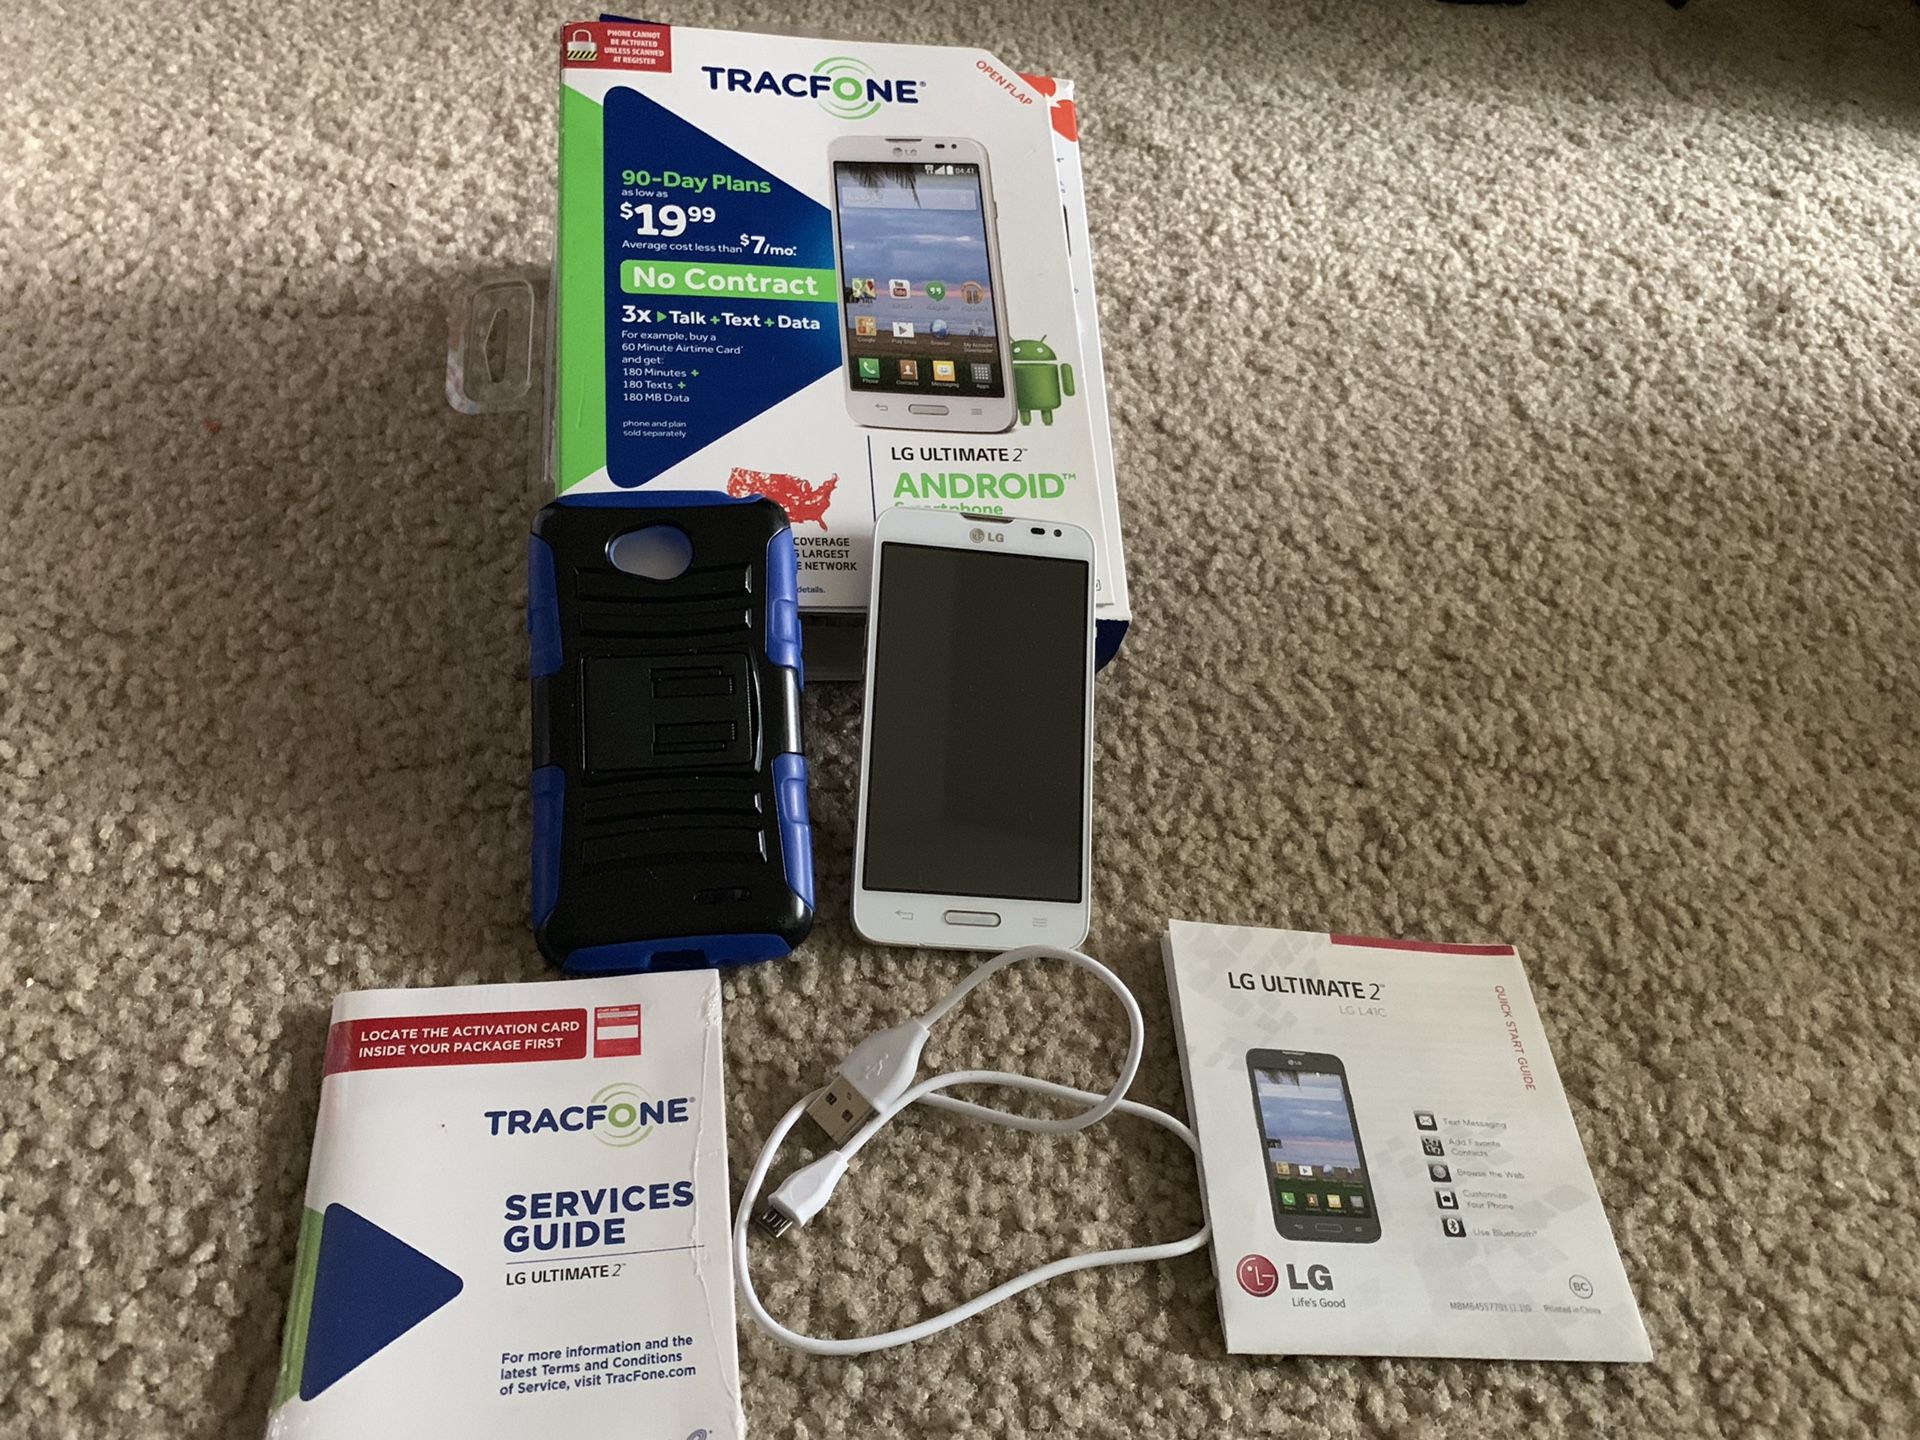 Like New TRACFONE LG Ultimate 2 ANDROID